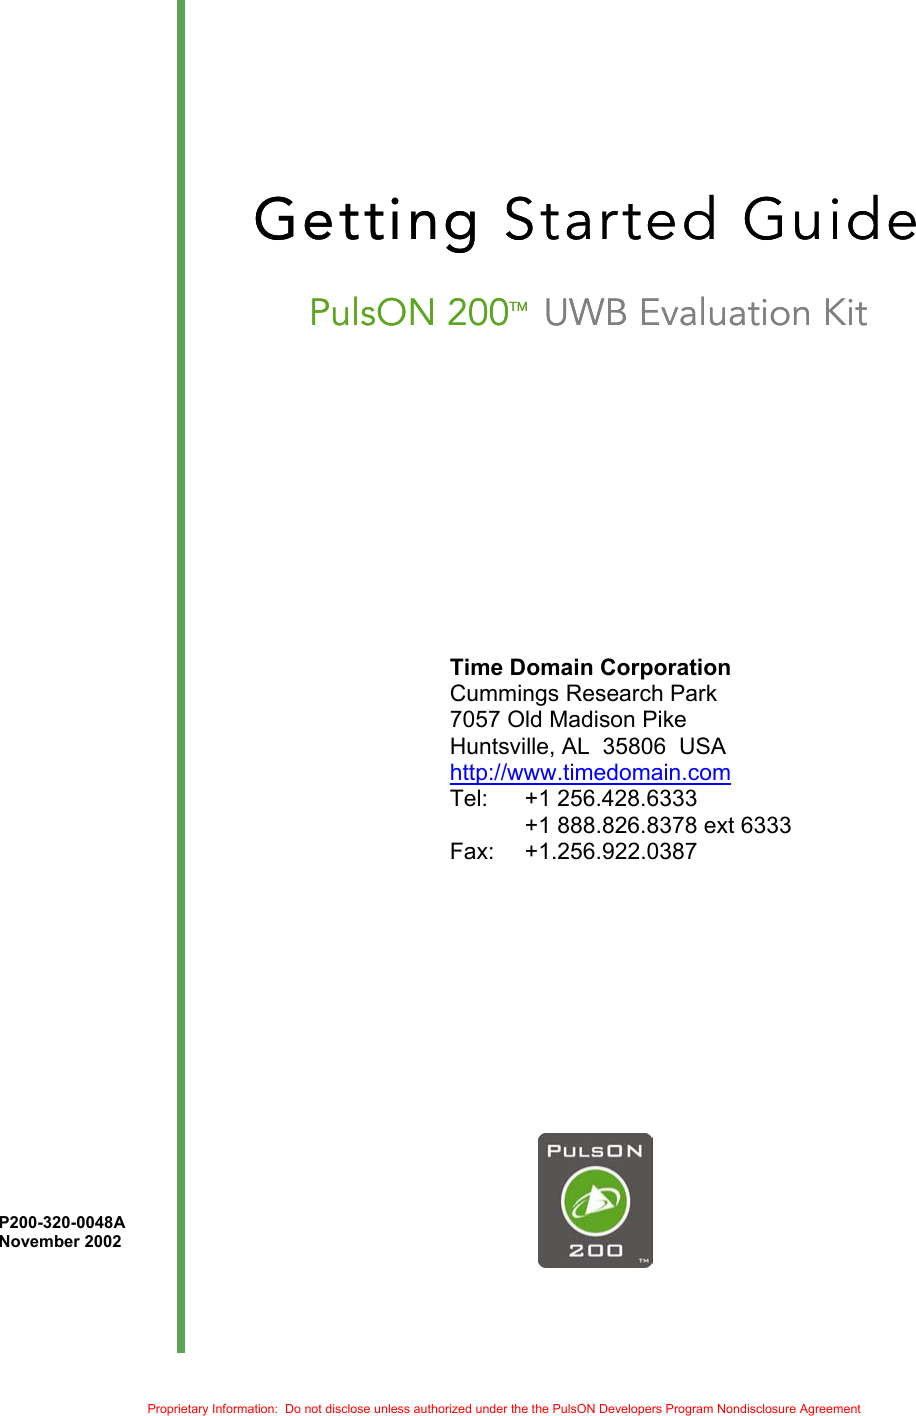     Getting Started Guide Getting Started Guide PulsON 200TM  UWB Evaluation Kit PulsON 200TM  UWB Evaluation Kit             Time Domain Corporation  Cummings Research Park   7057 Old Madison Pike   Huntsville, AL  35806  USA http://www.timedomain.com Tel:   +1 256.428.6333   +1 888.826.8378 ext 6333 Fax: +1.256.922.0387                   P200-320-0048A     November 2002    Proprietary Information:  Do not disclose unless authorized under the the PulsON Developers Program Nondisclosure Agreement 